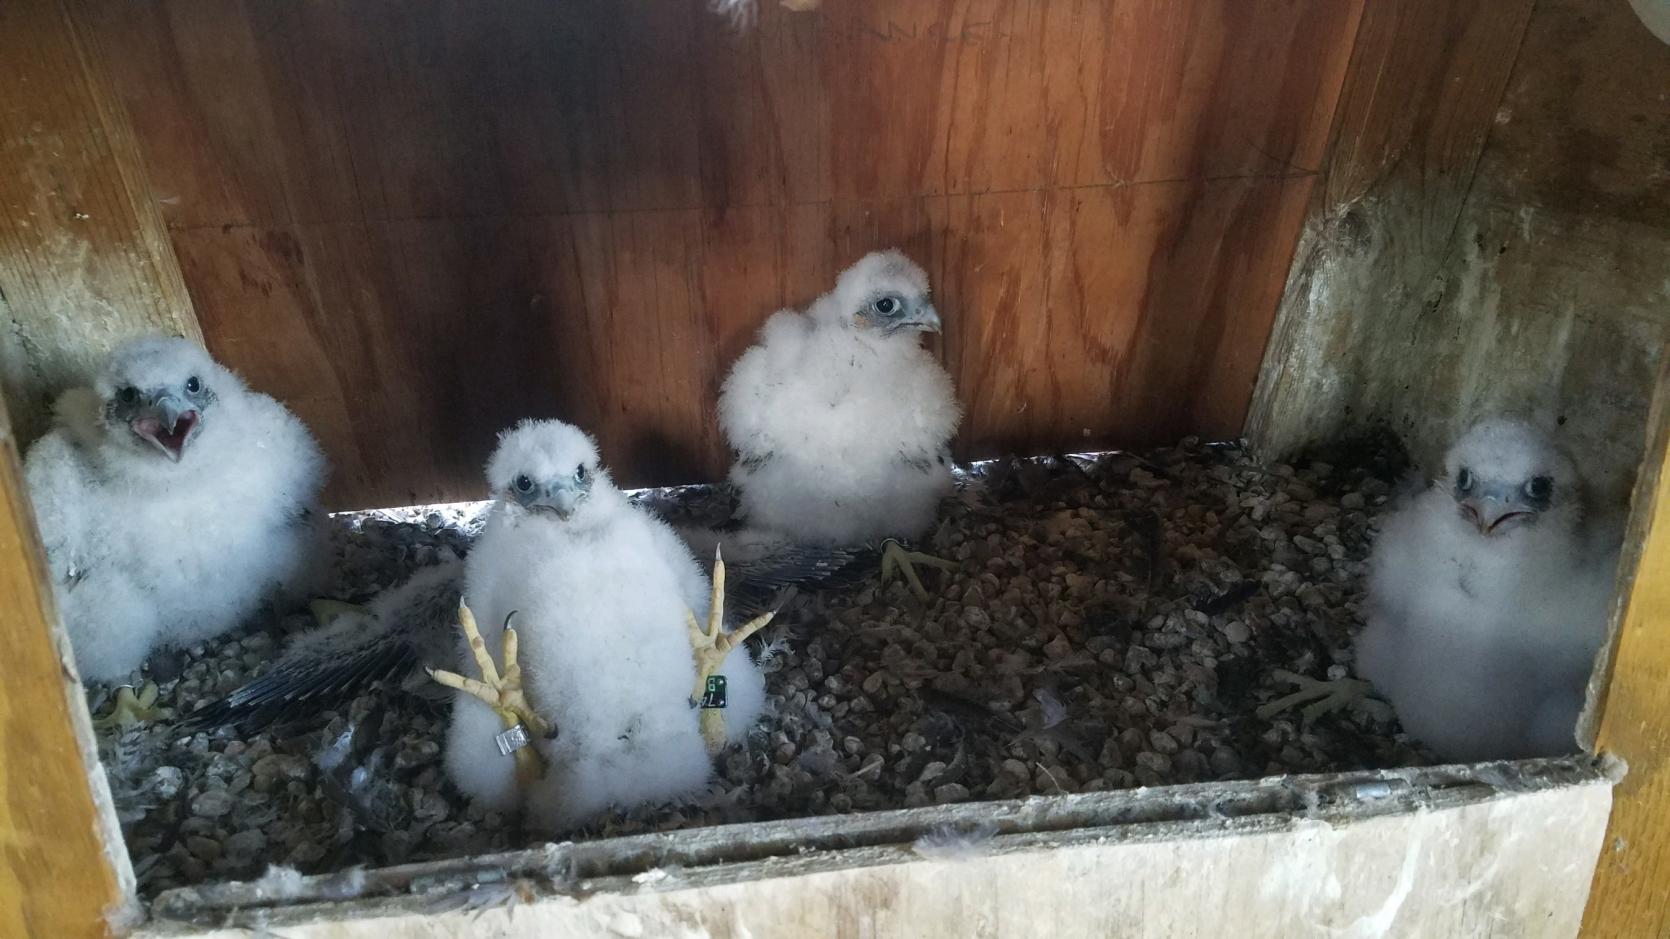 Peregrine falcon chicks with bands.